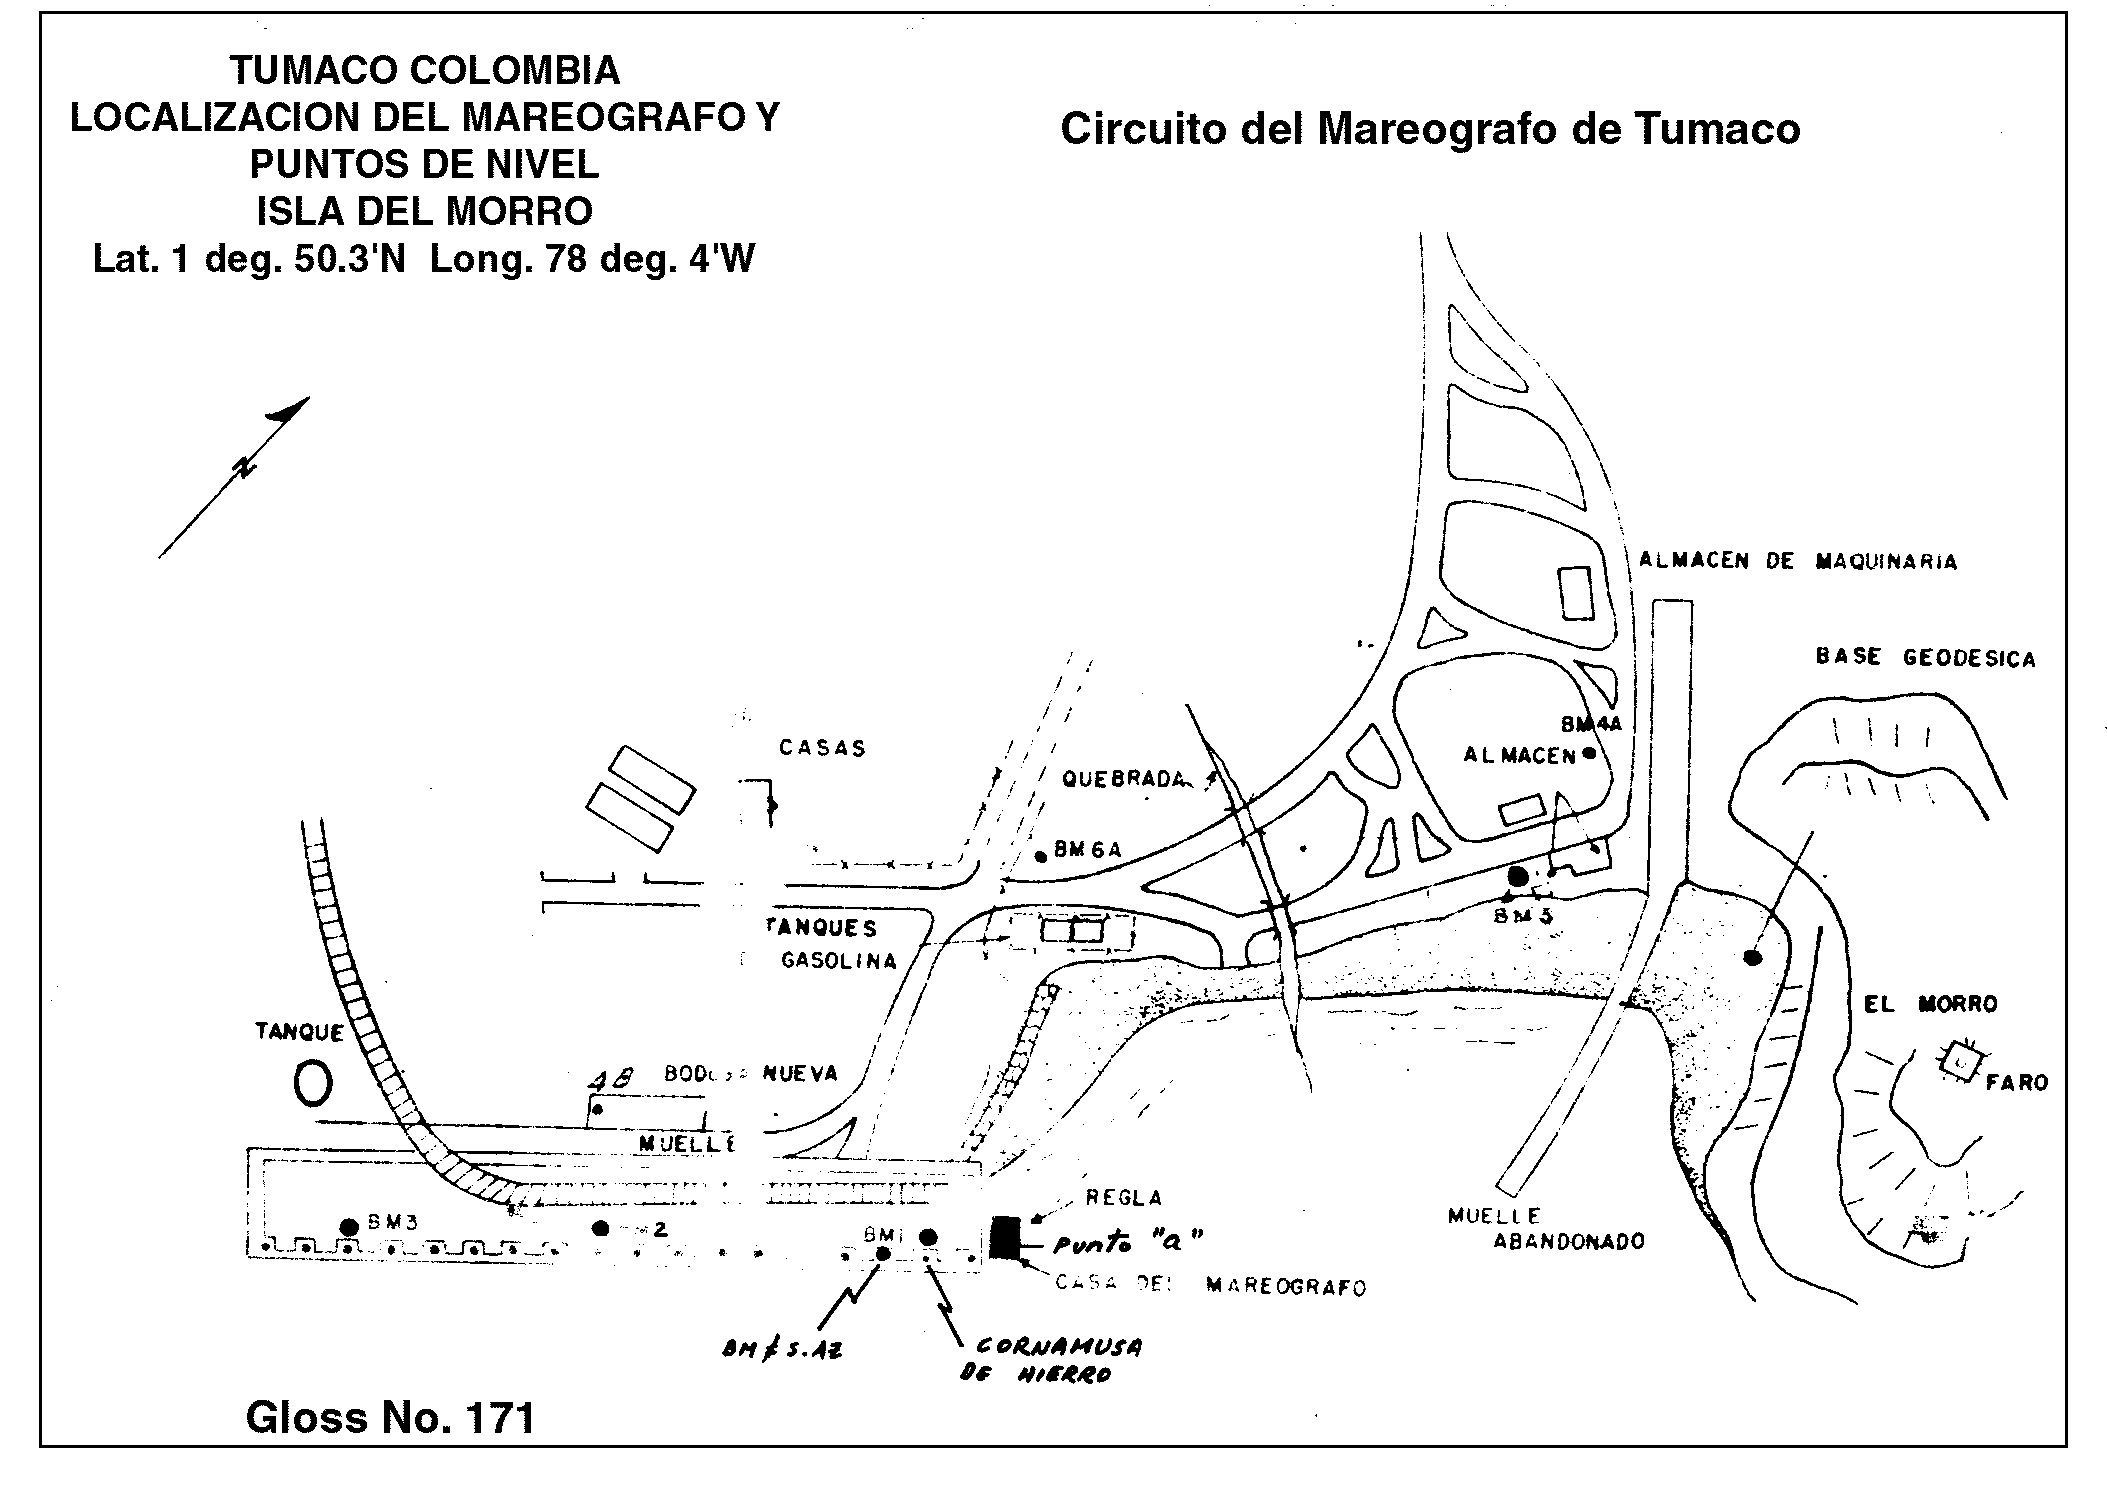 Location map for Tumaco, Colombia